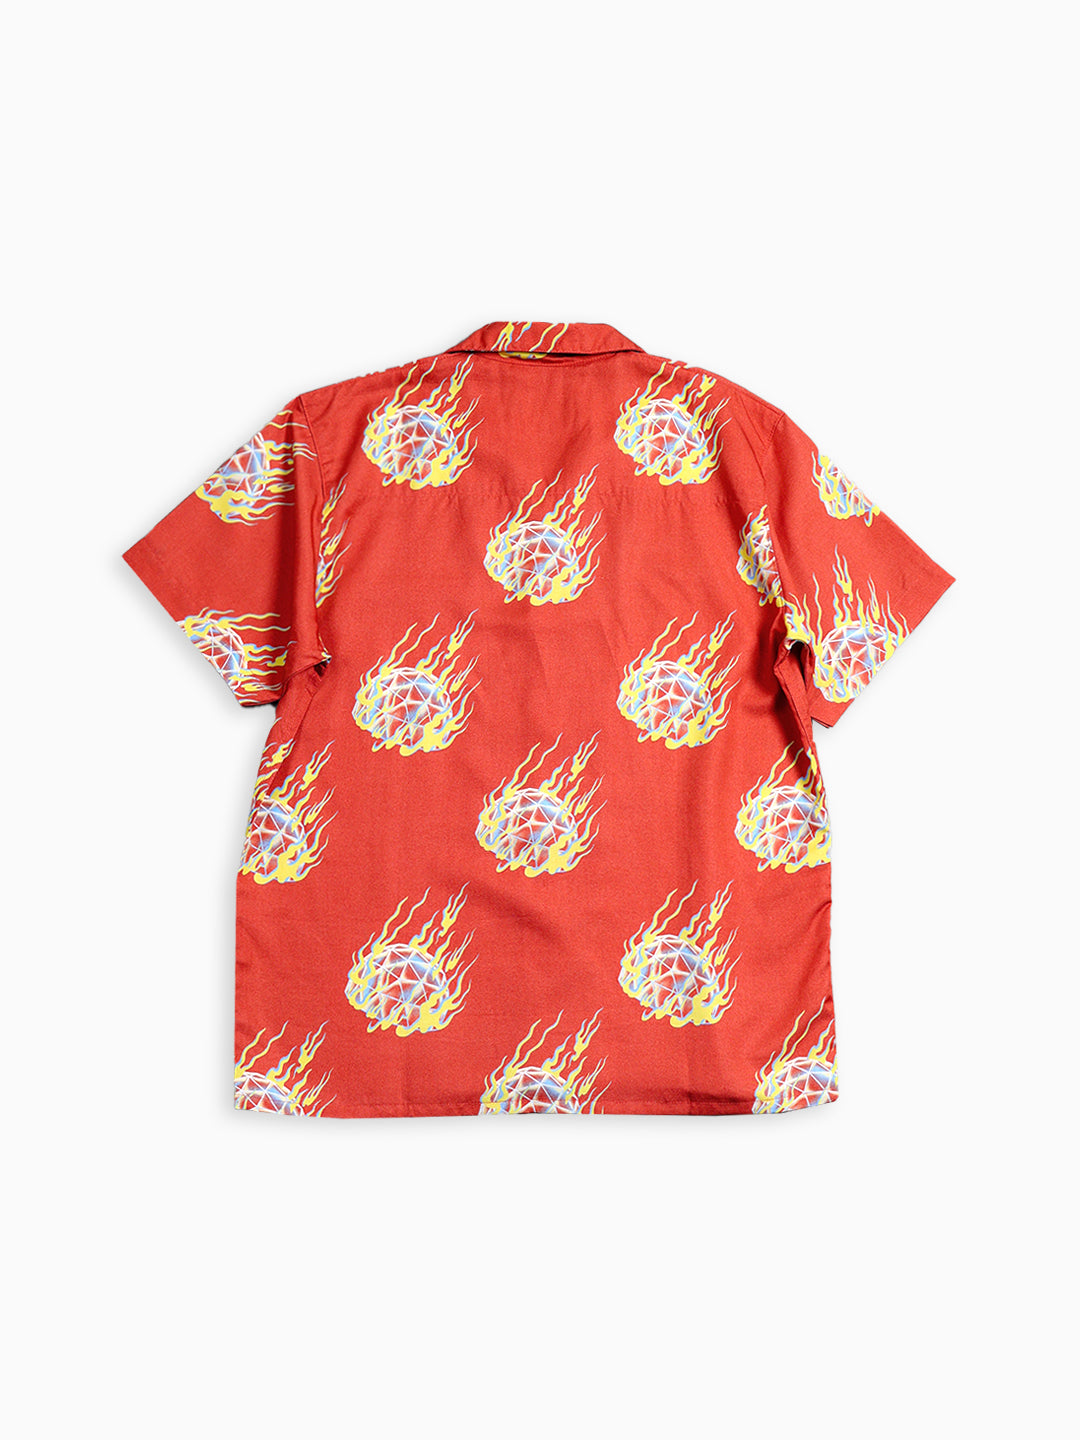 Dome on Fire Shirt